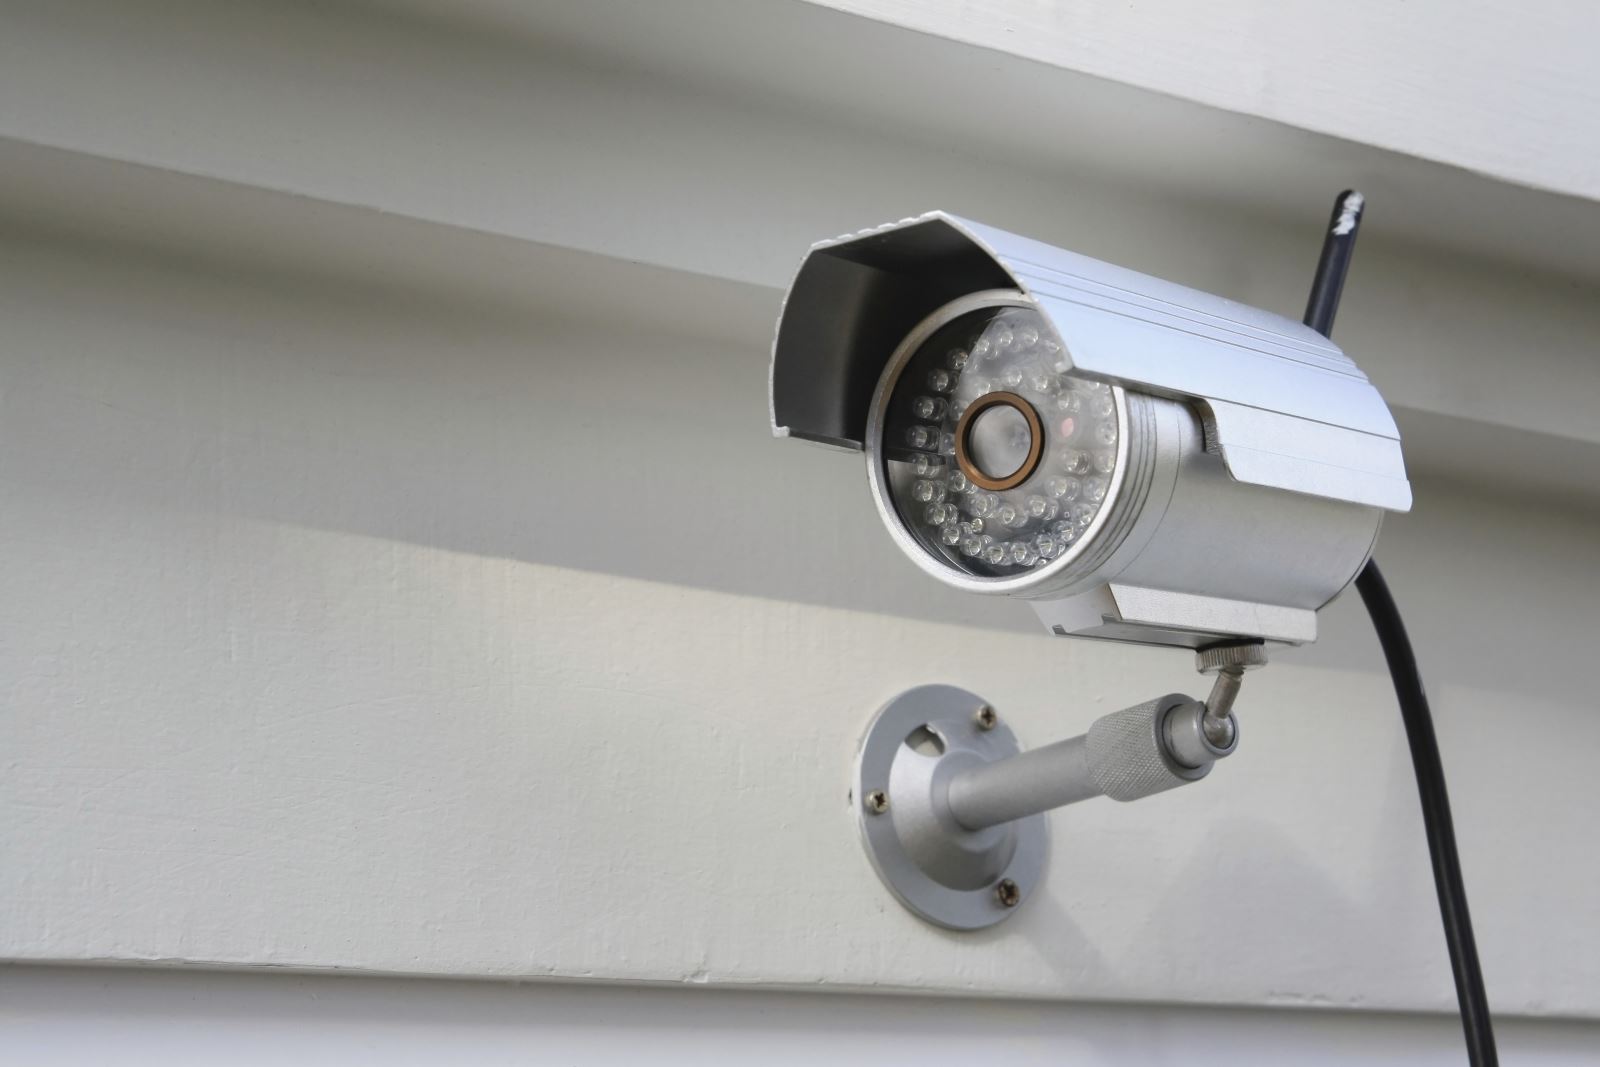 How To Register Home Security Cameras With The Police